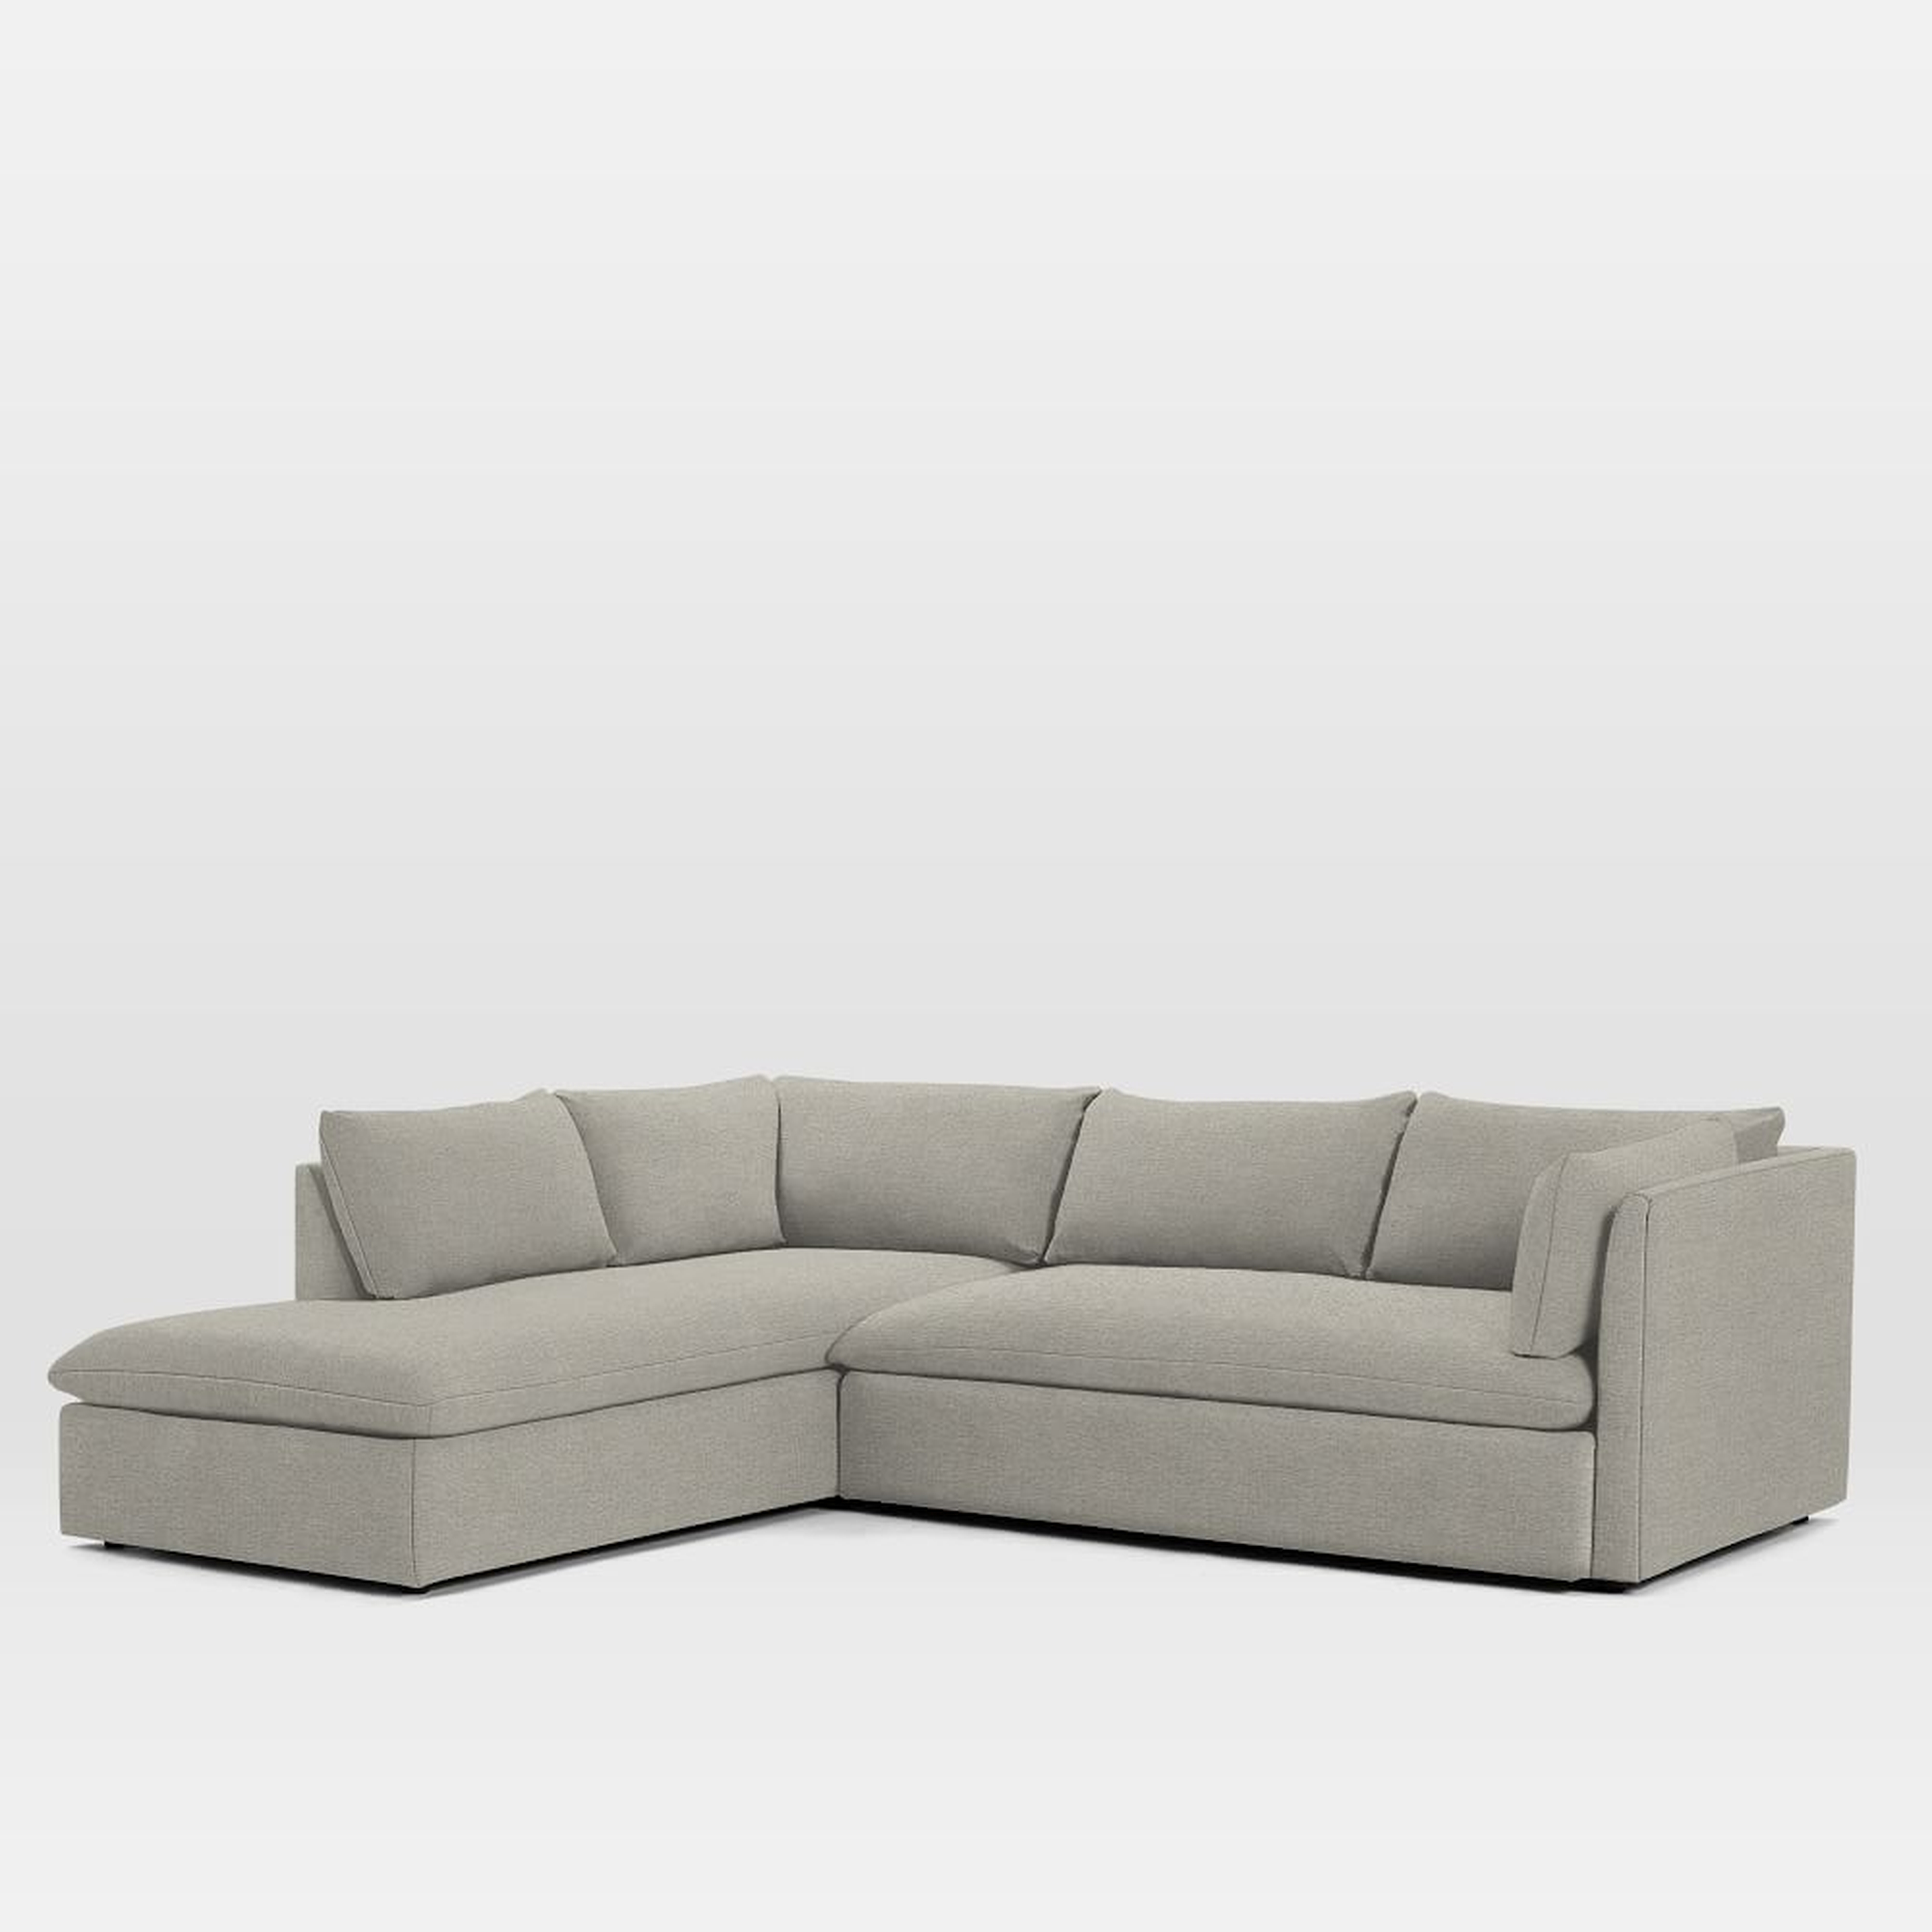 Shelter 106" Left 2-Piece Bumper Chaise Sectional, Twill, Dove - West Elm